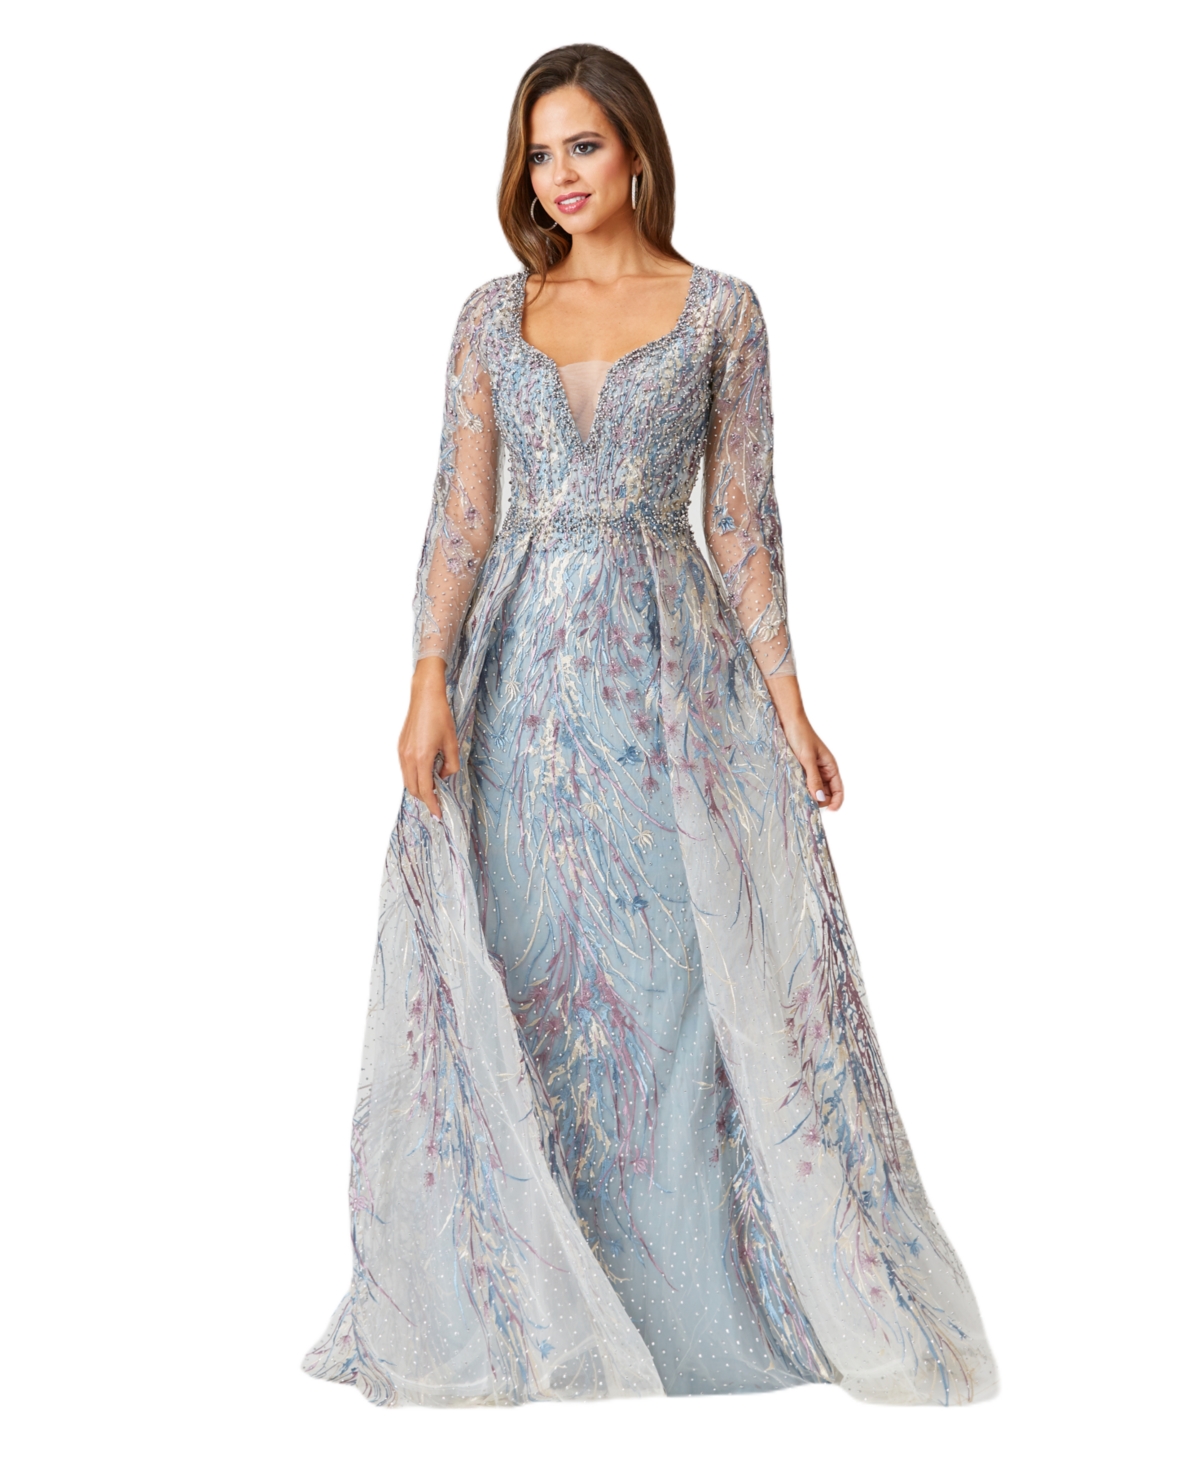 Women's Long Sleeve Lace Gown with Overskirt - Multi